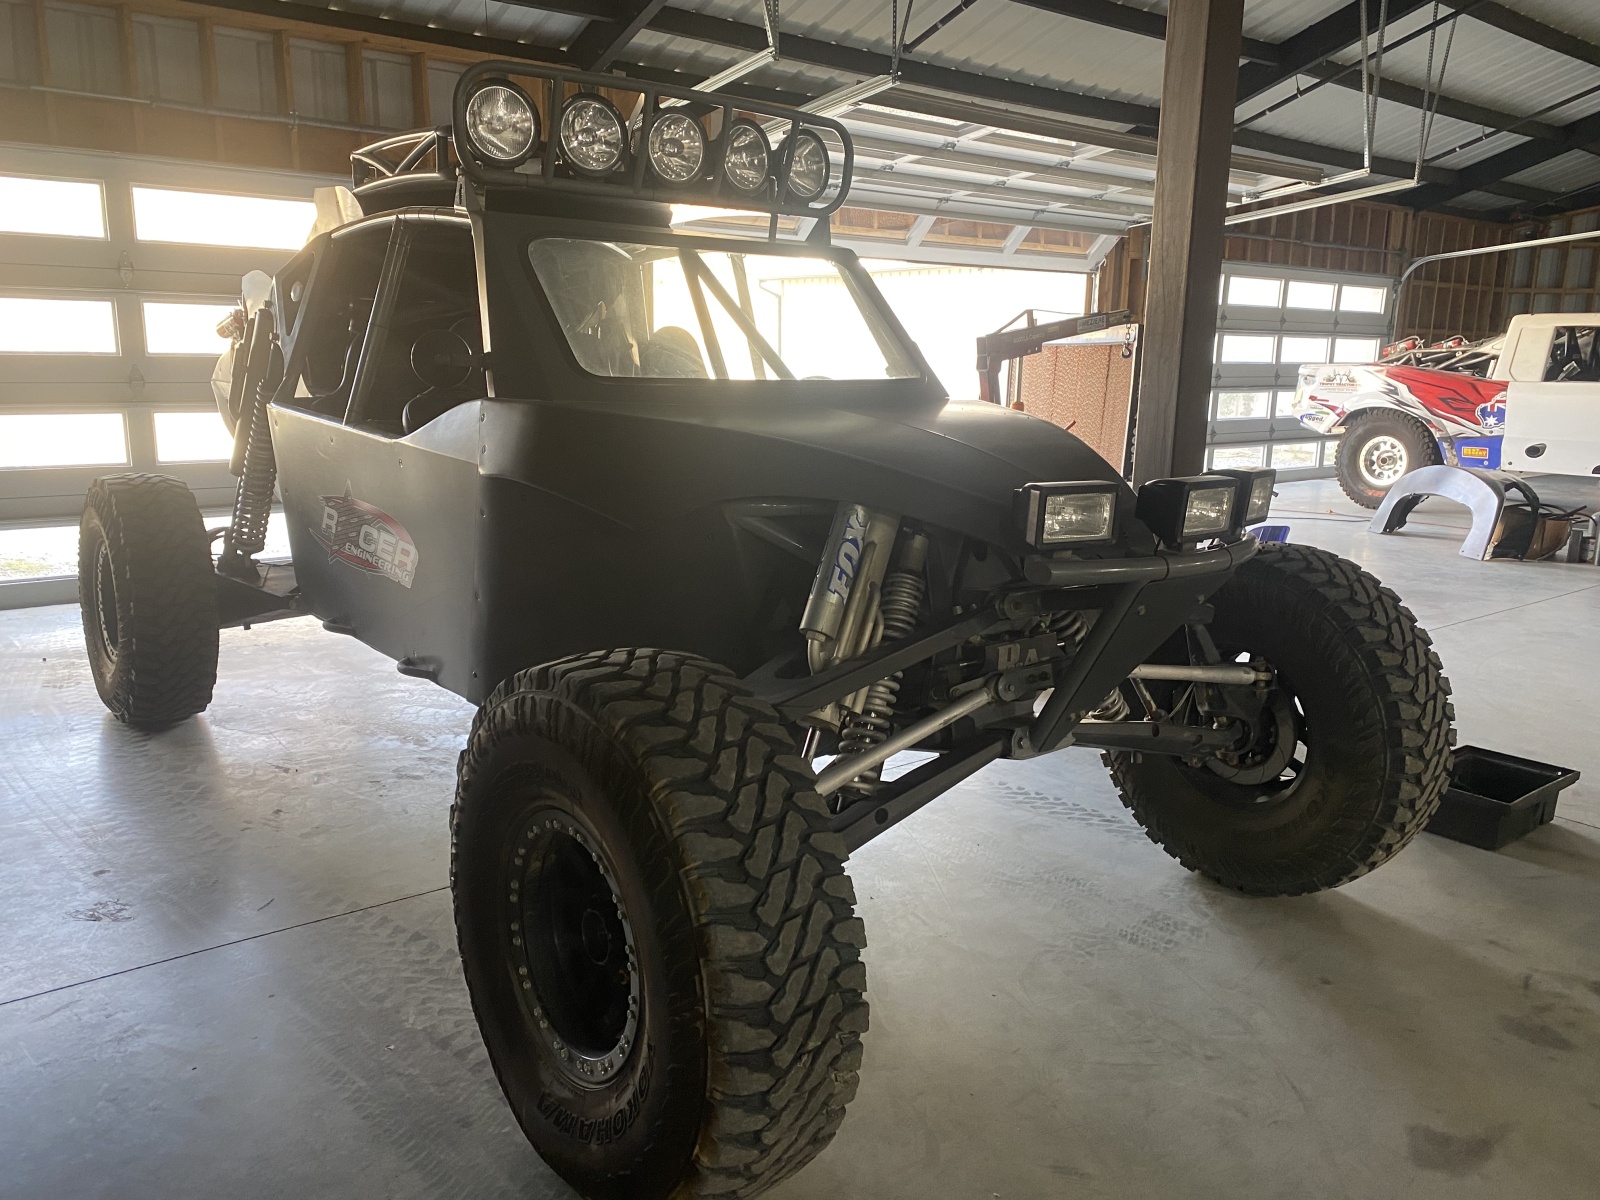 For Sale: Racer Engineering Prerunner (4 seat), Class 1 car - photo4